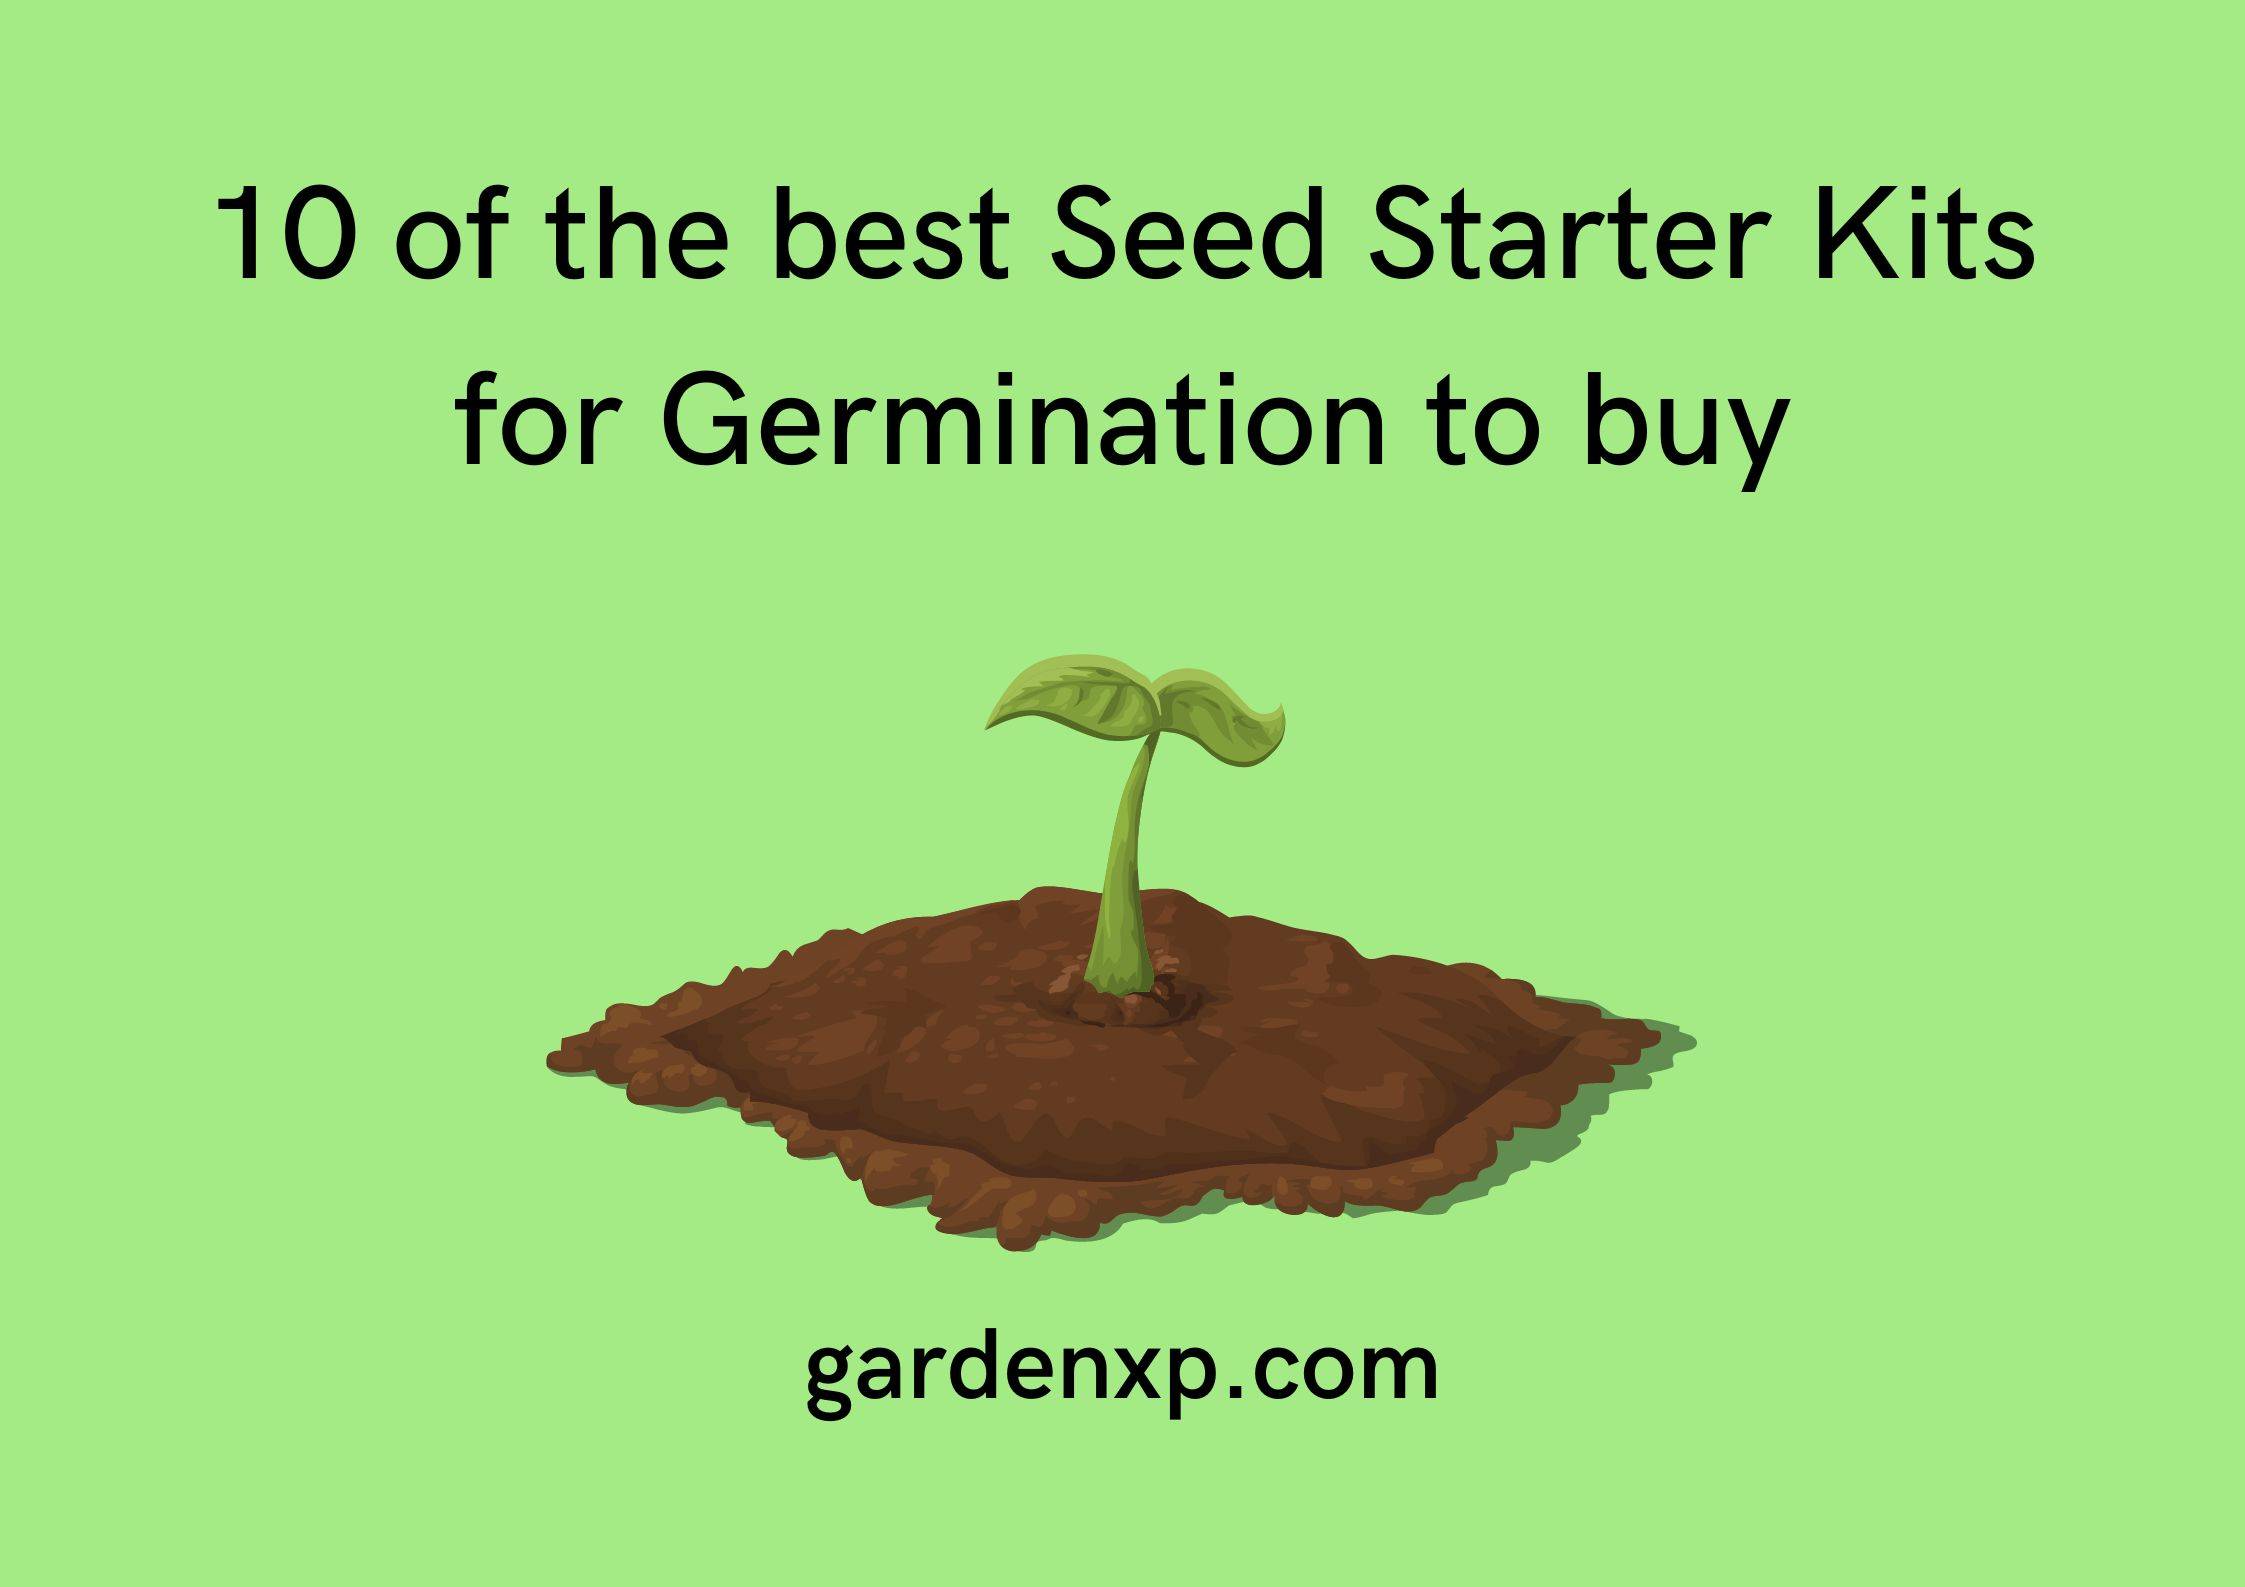 10 of the best Seed Starter Kits for Germination to buy